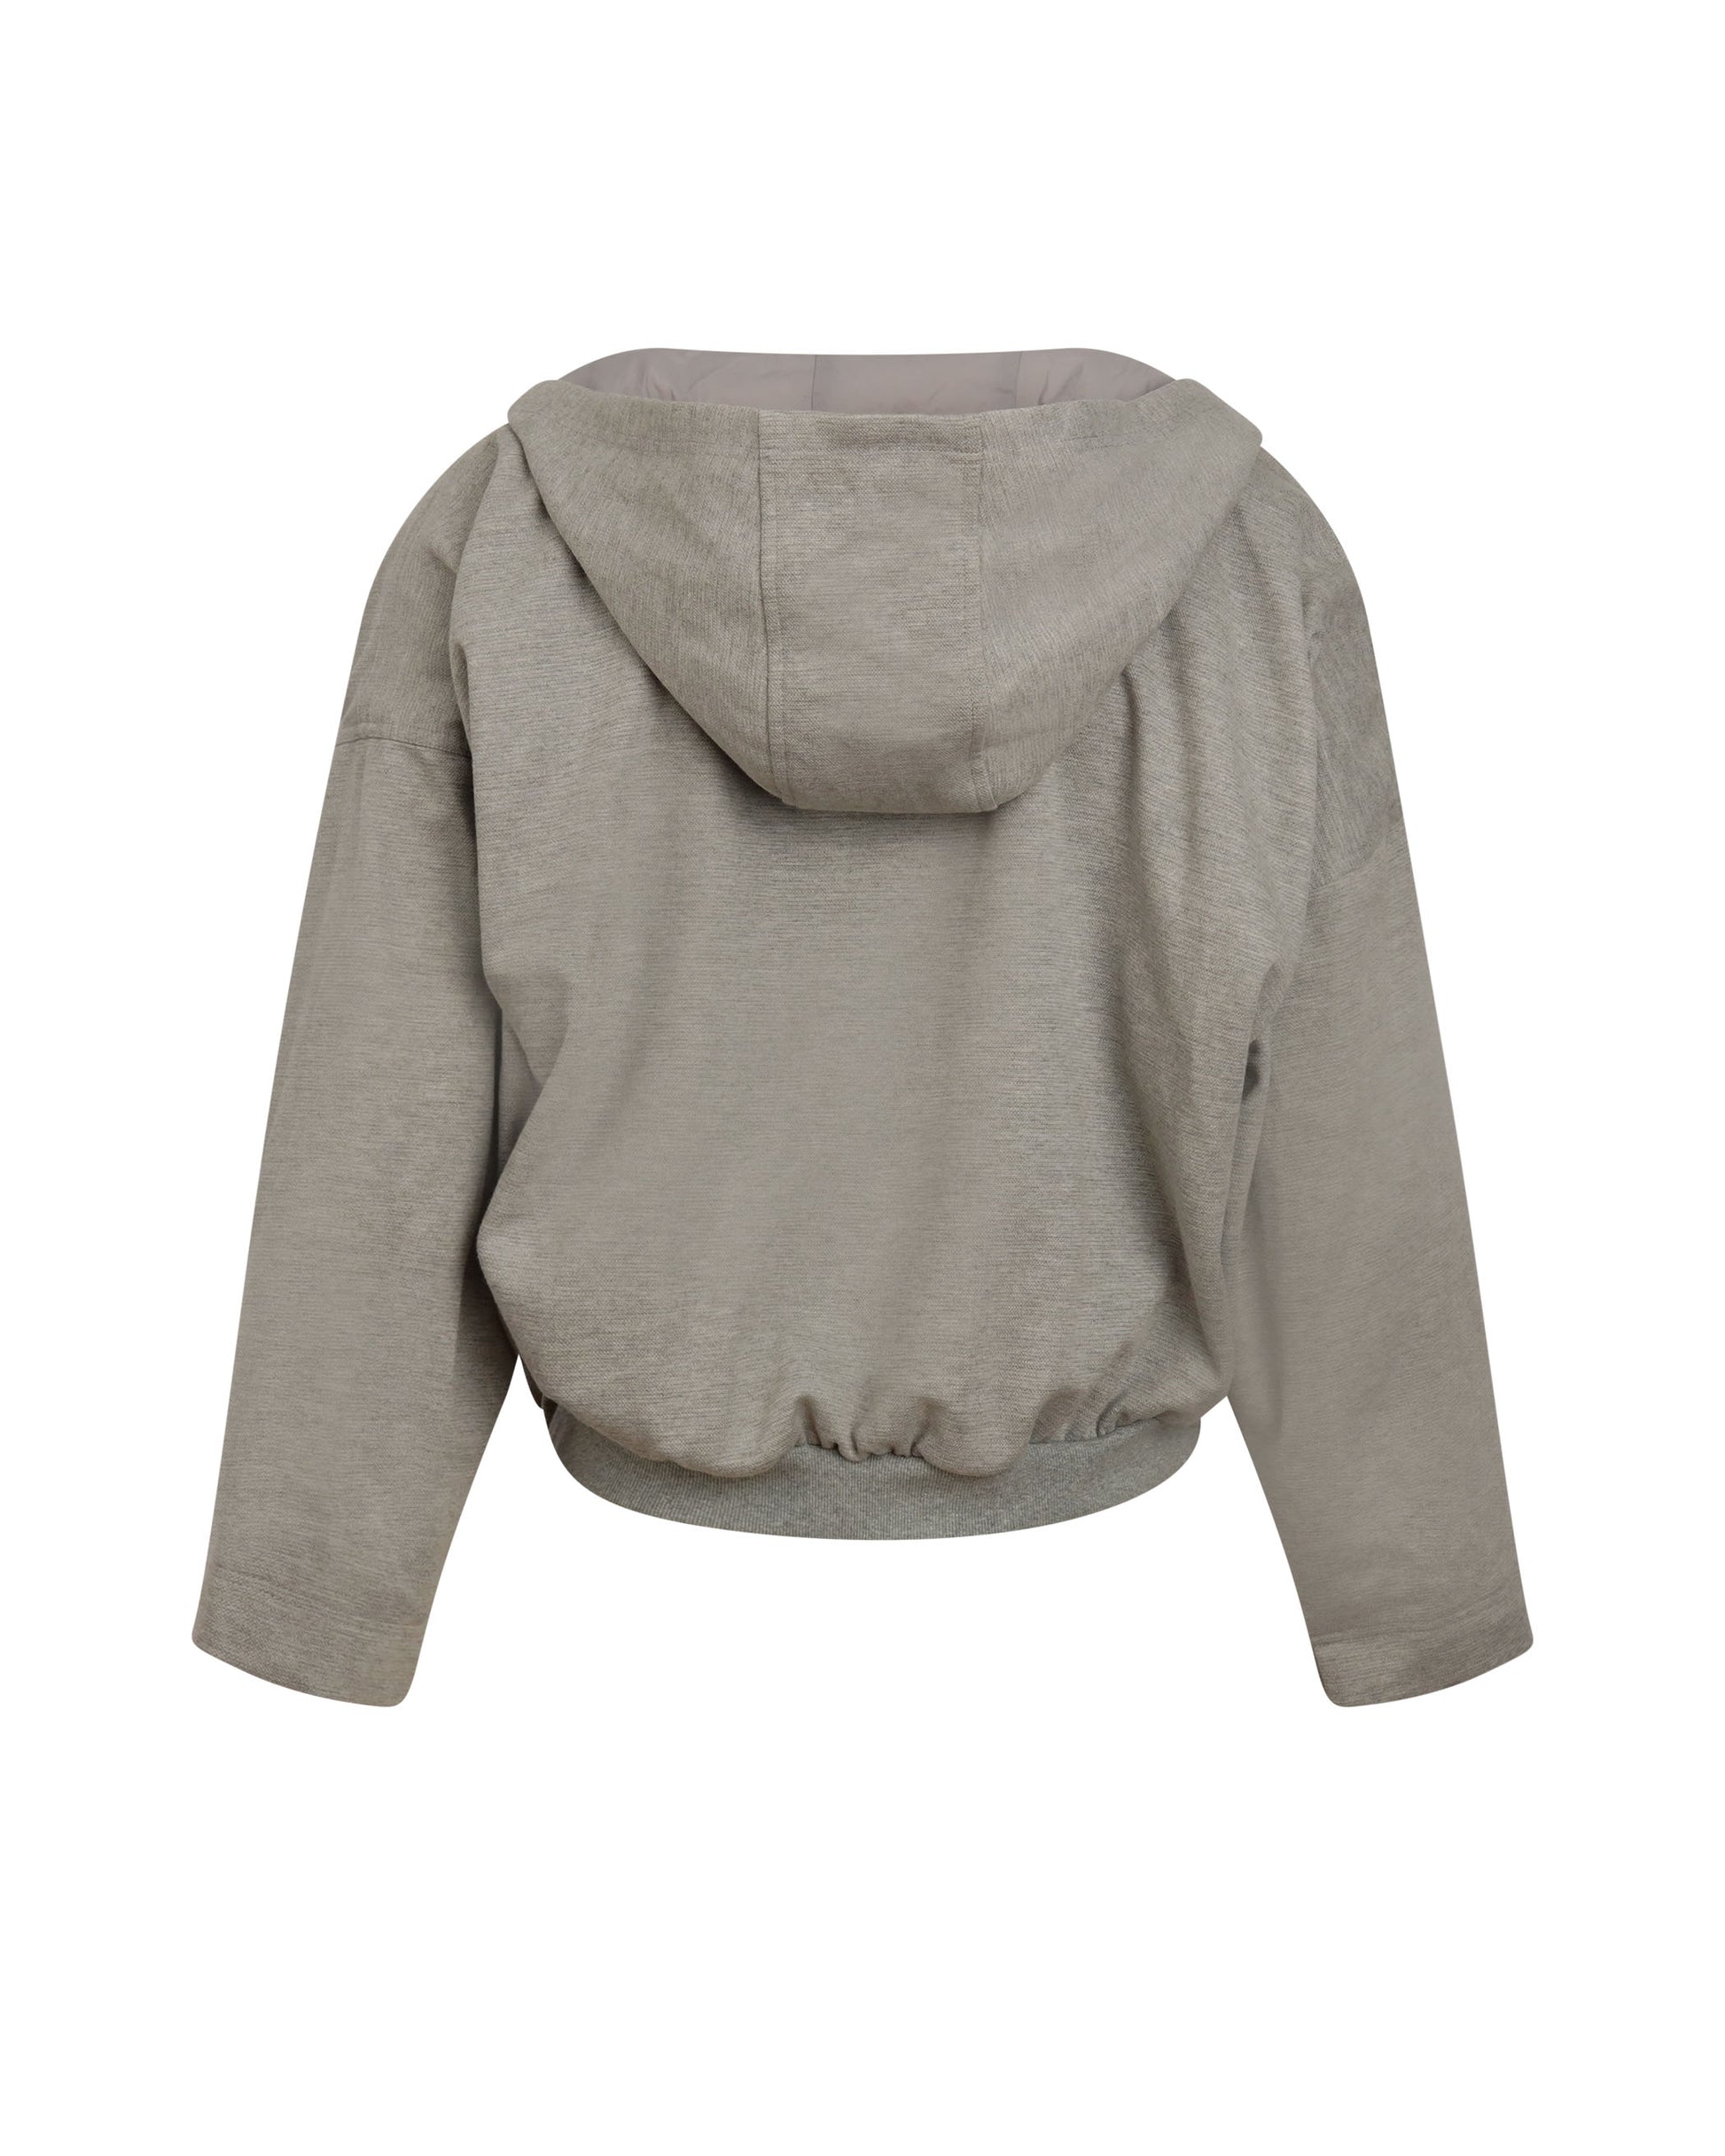 Back View of Grey Hooded Wrap Top by Mind Less